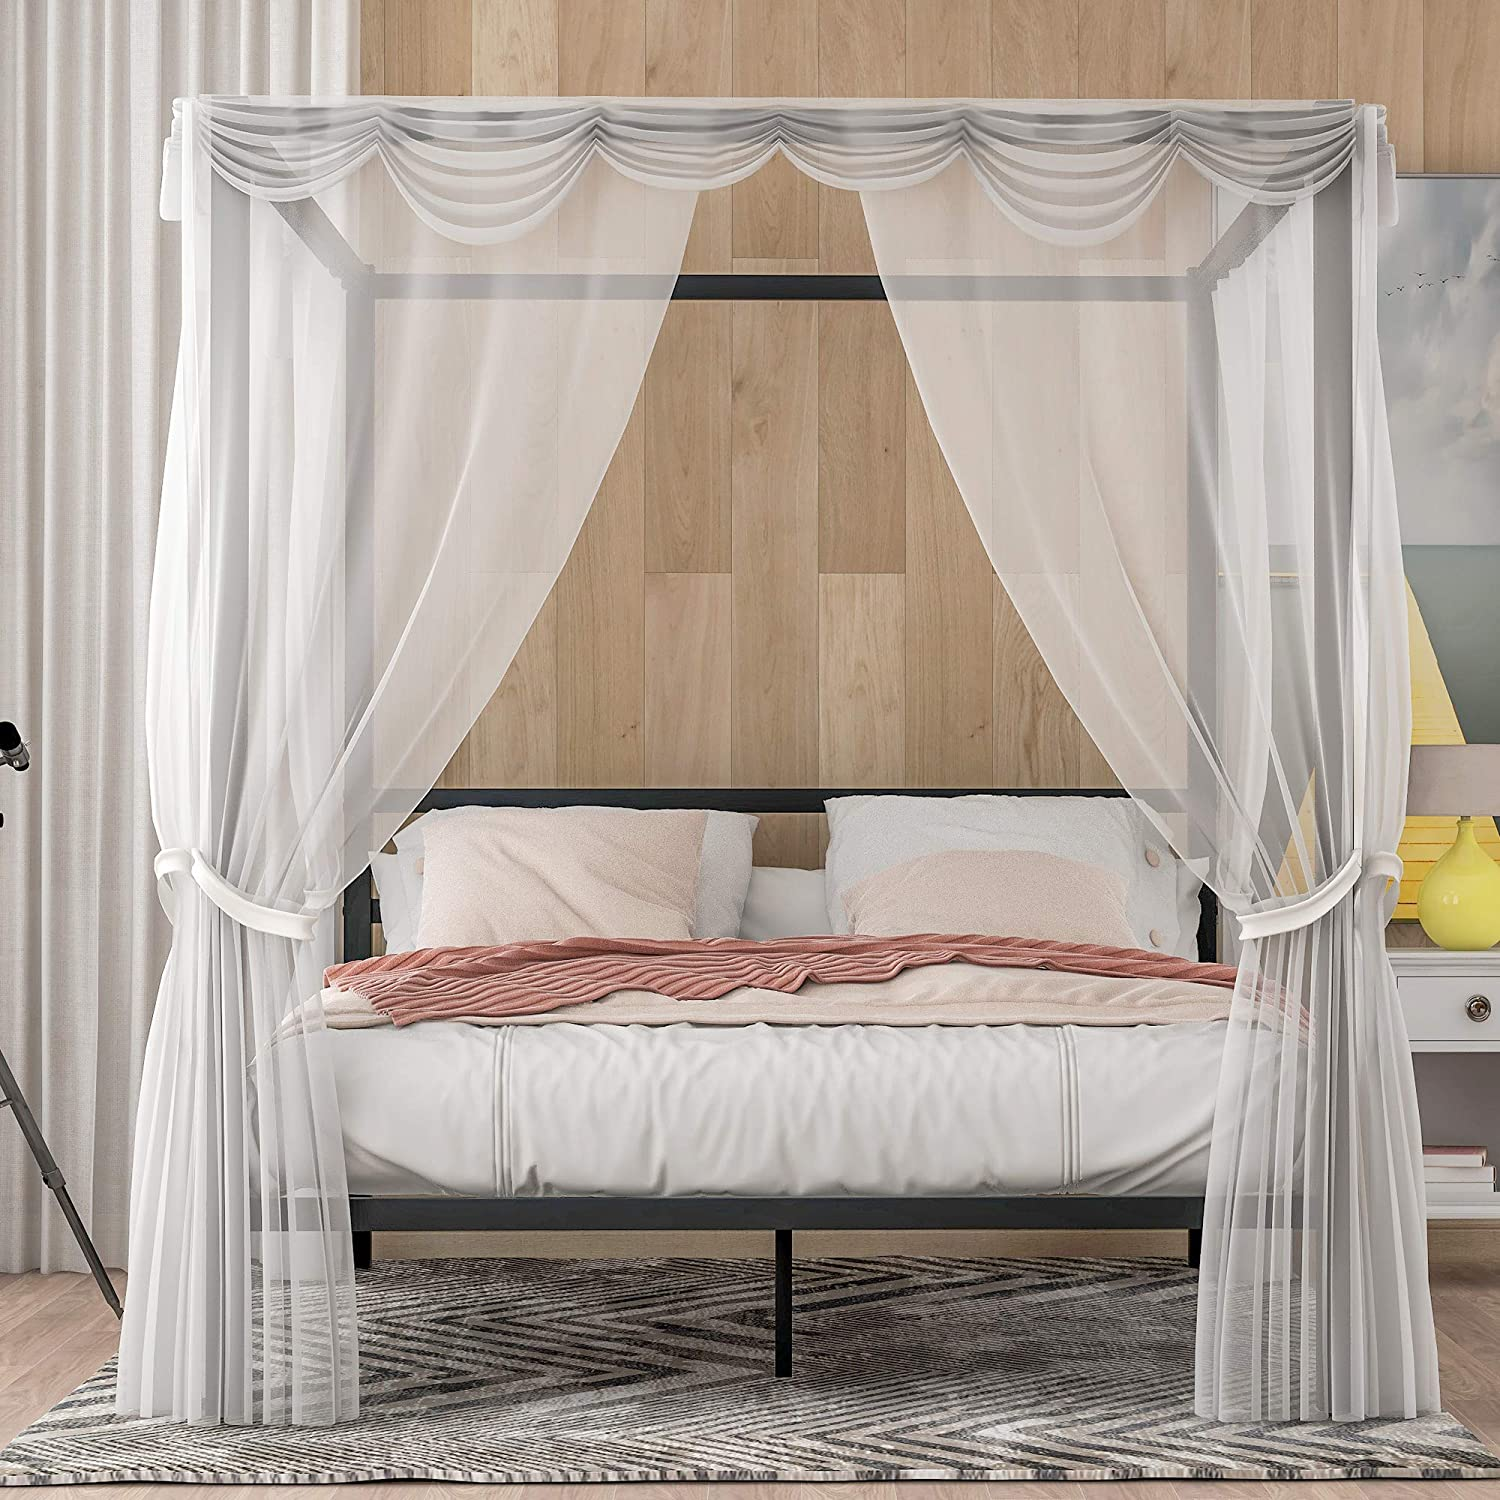 A sleep metal canopy bed provides more protection from mosquitos compared to a sleigh bed